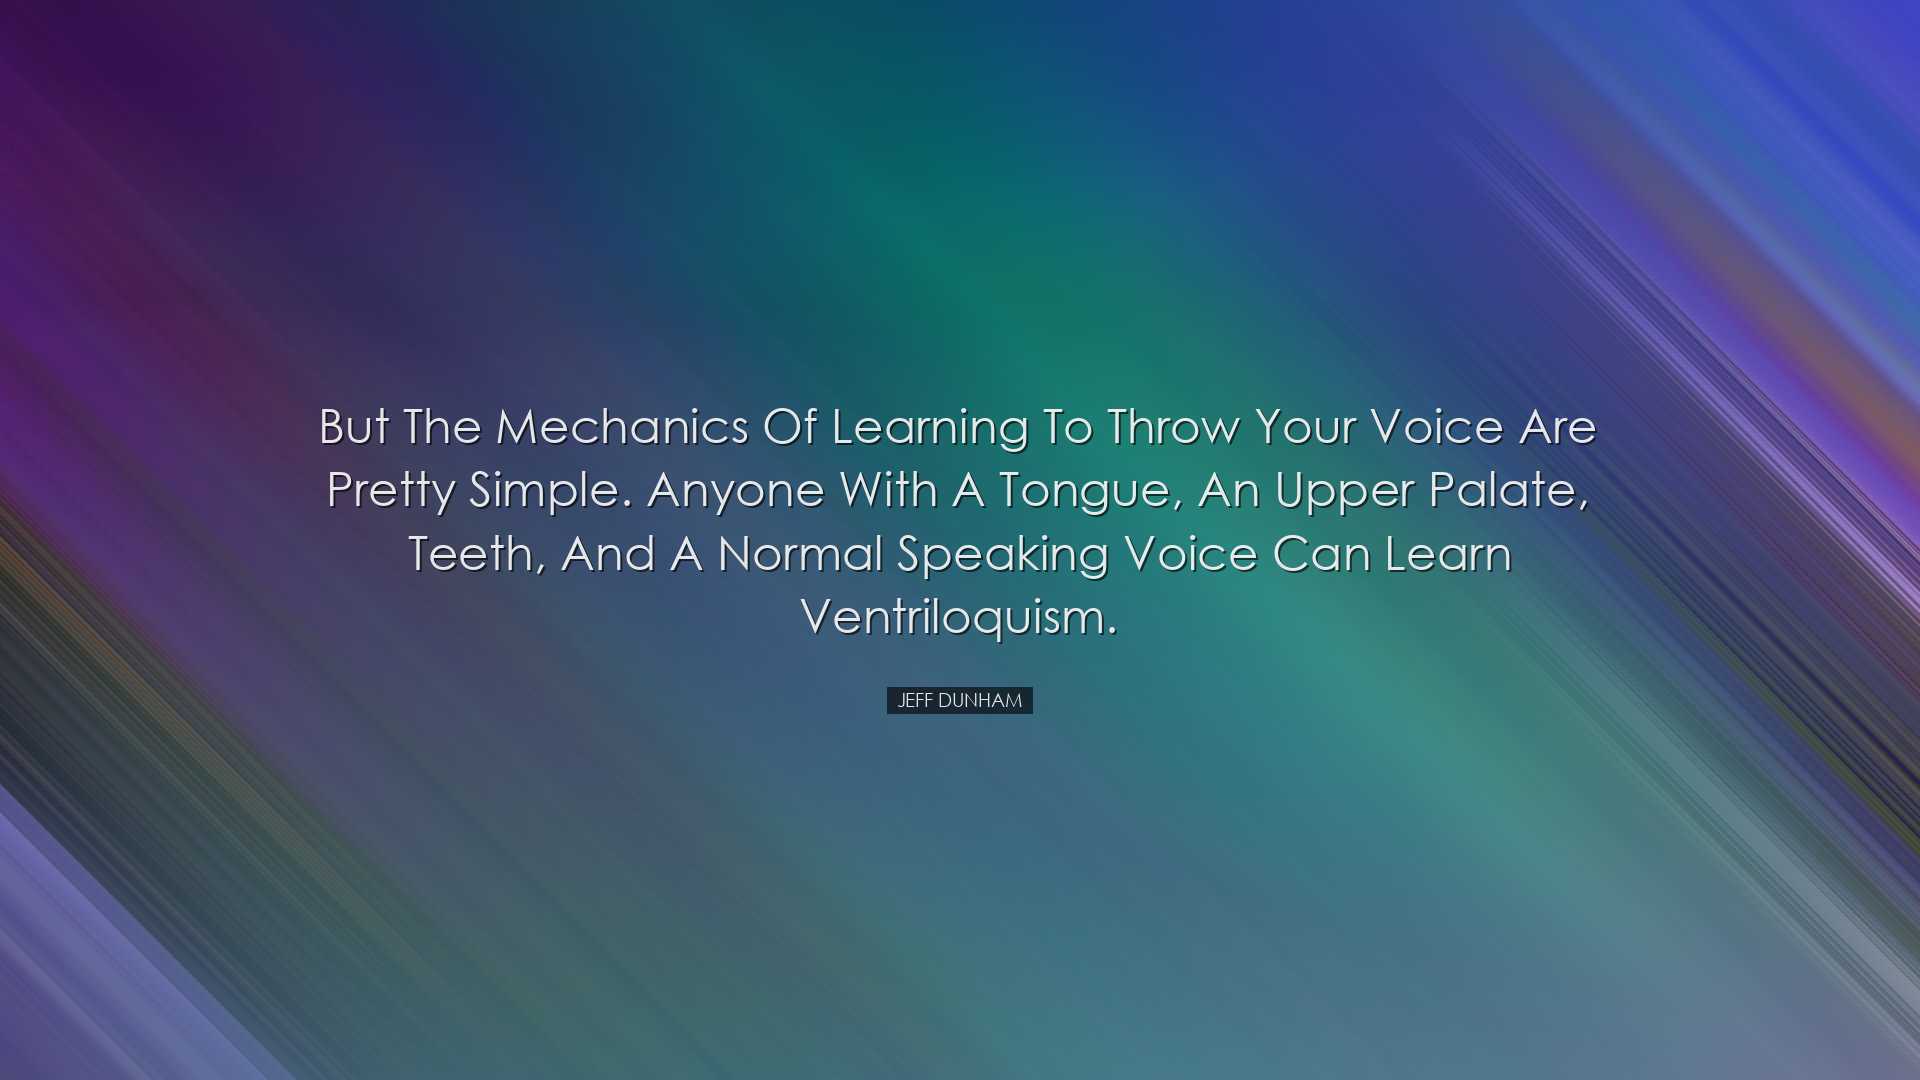 But the mechanics of learning to throw your voice are pretty simpl